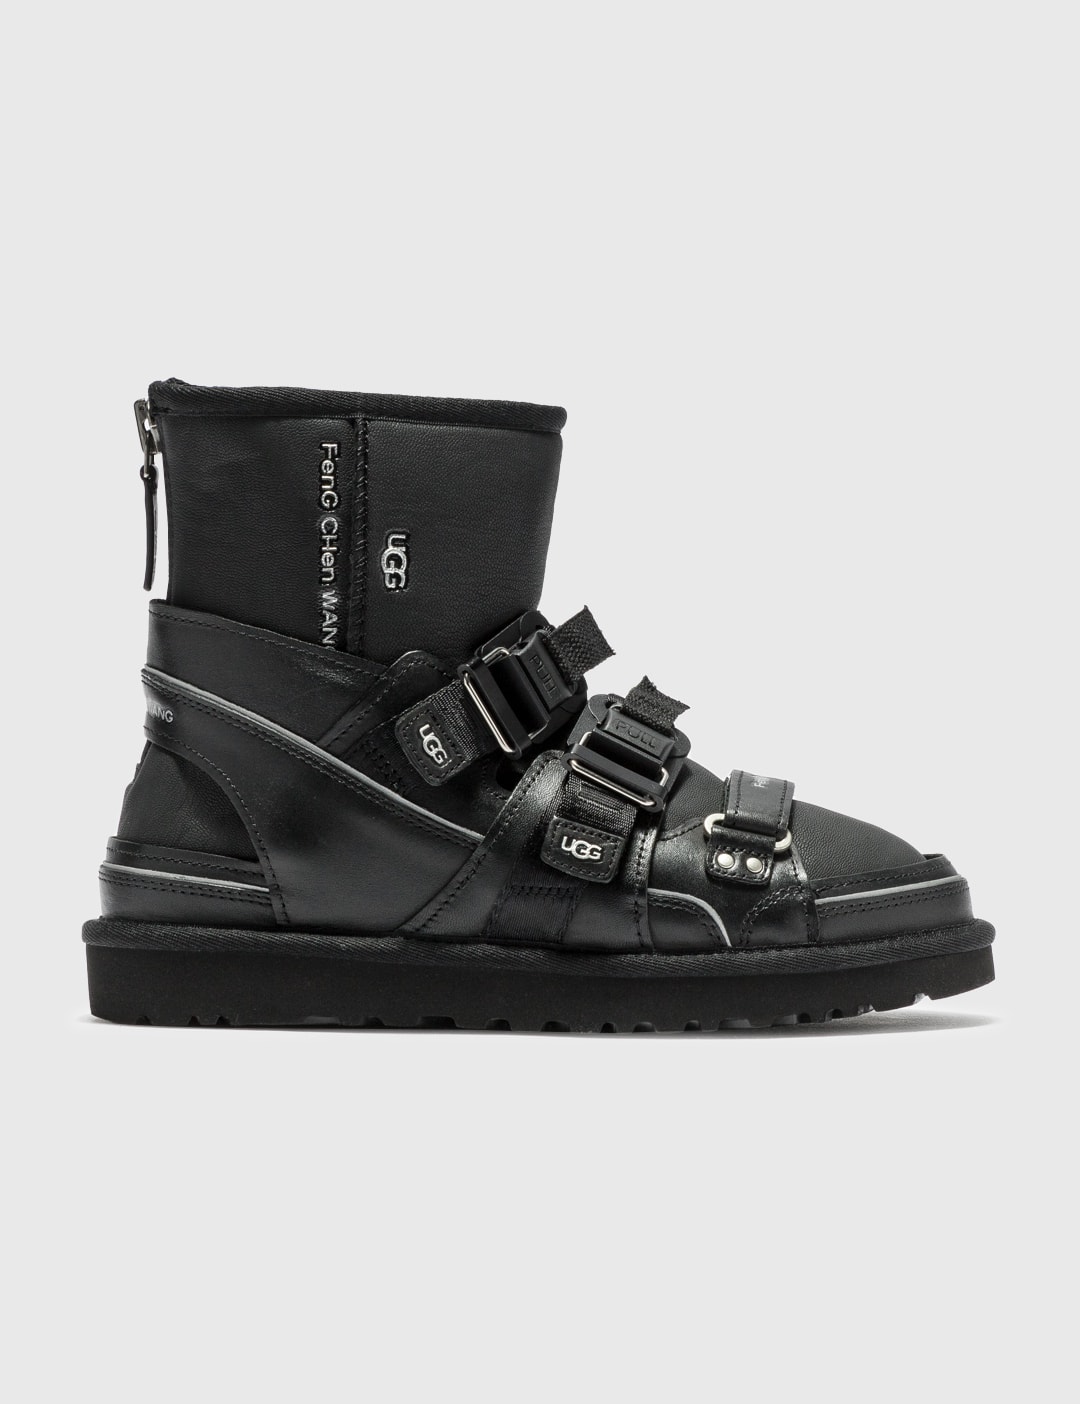 UGG x Feng Chen Wang Sandals Placeholder Image